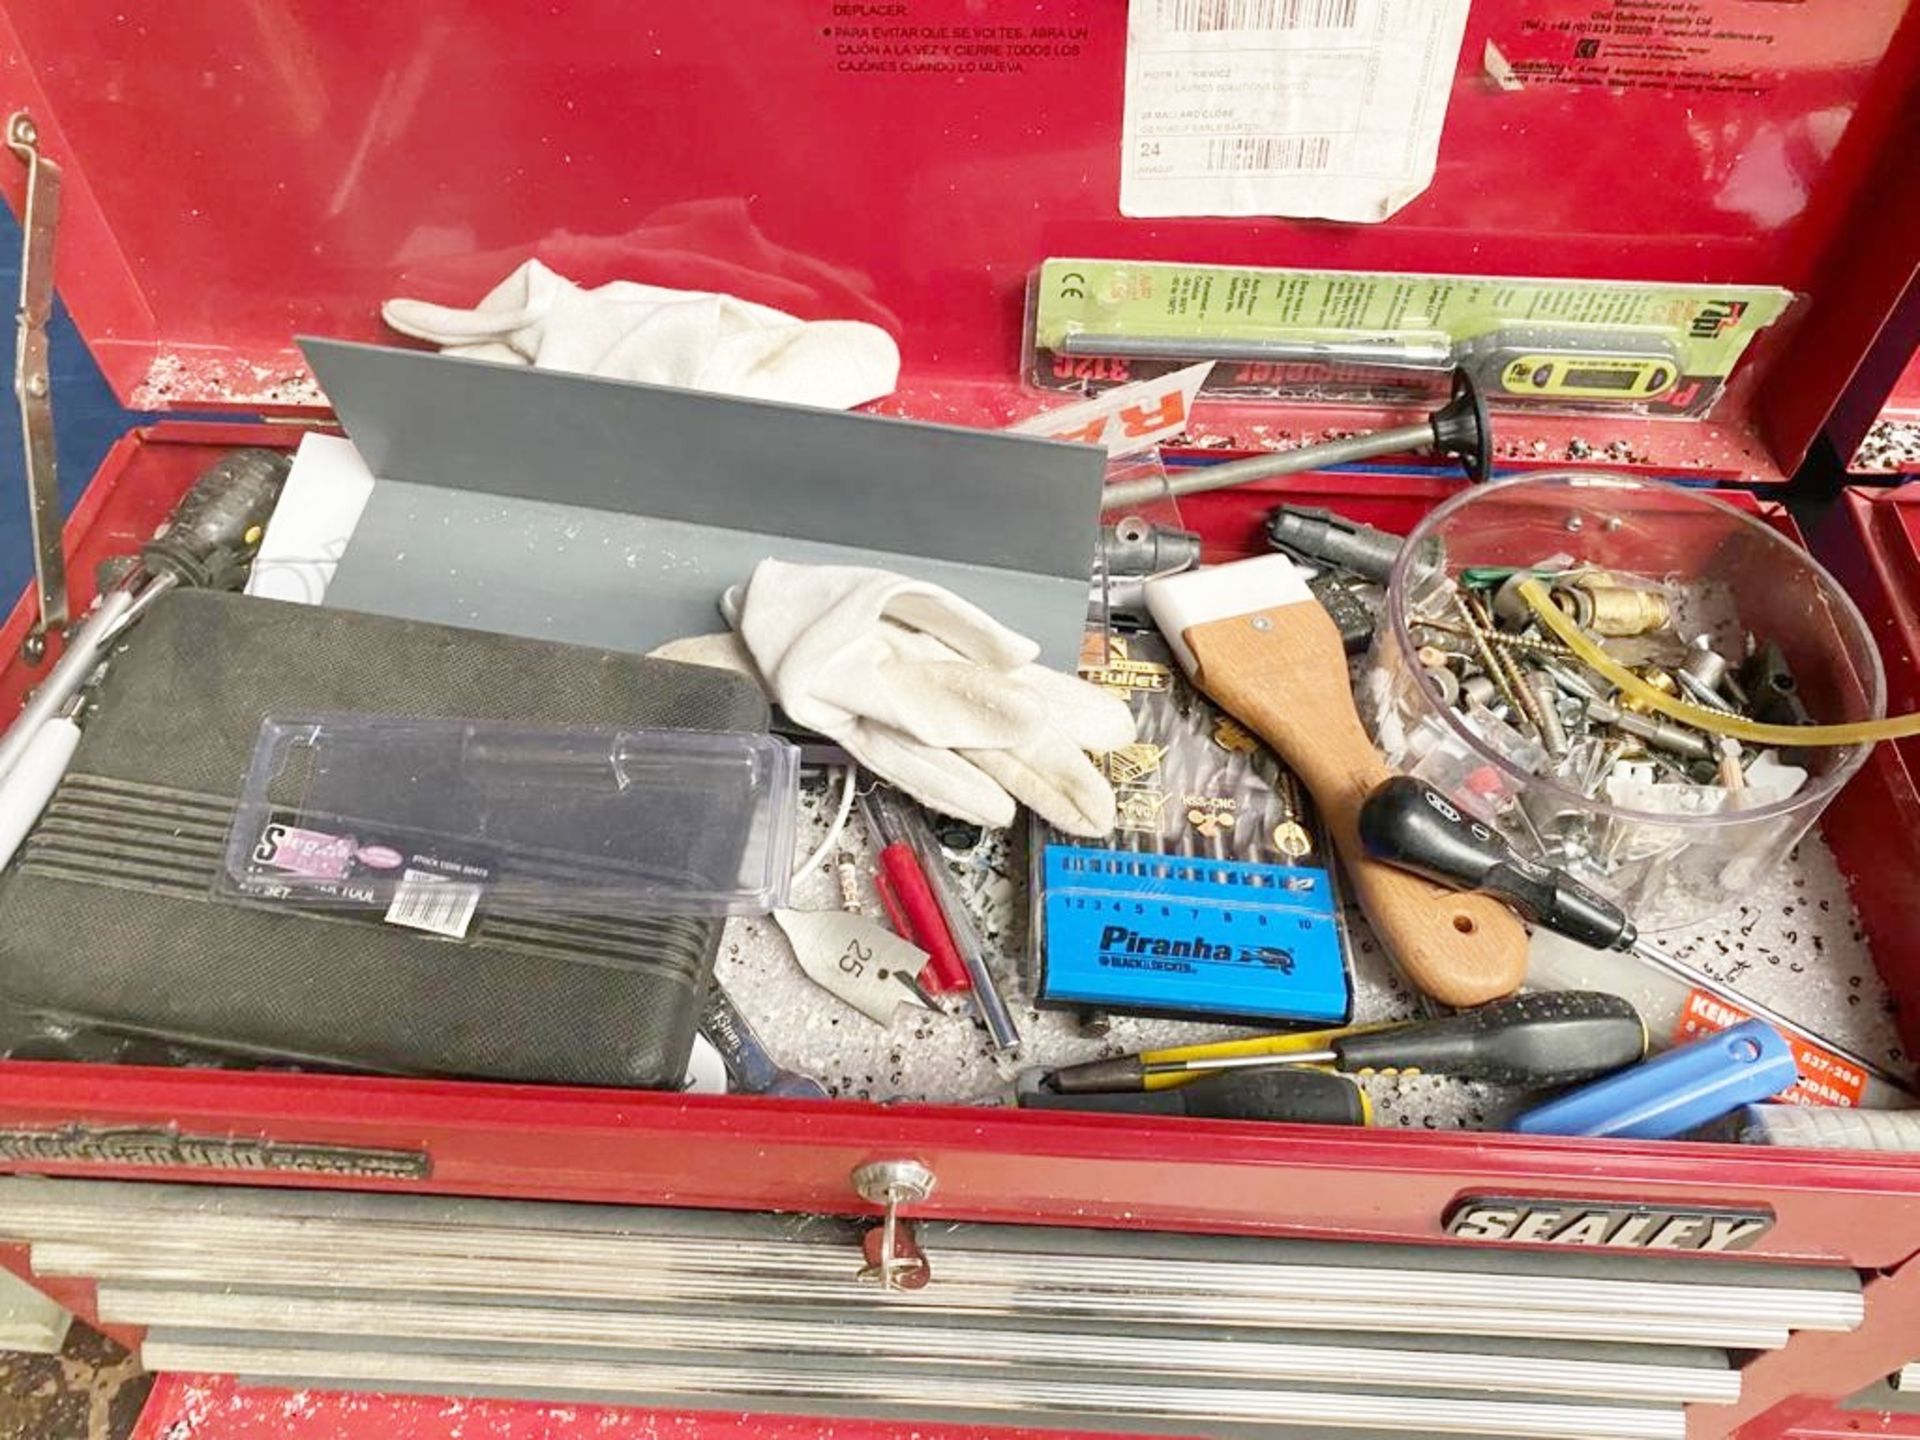 1 x Sealey Mobile Tool Chest With Contents as Pictured - Image 9 of 9